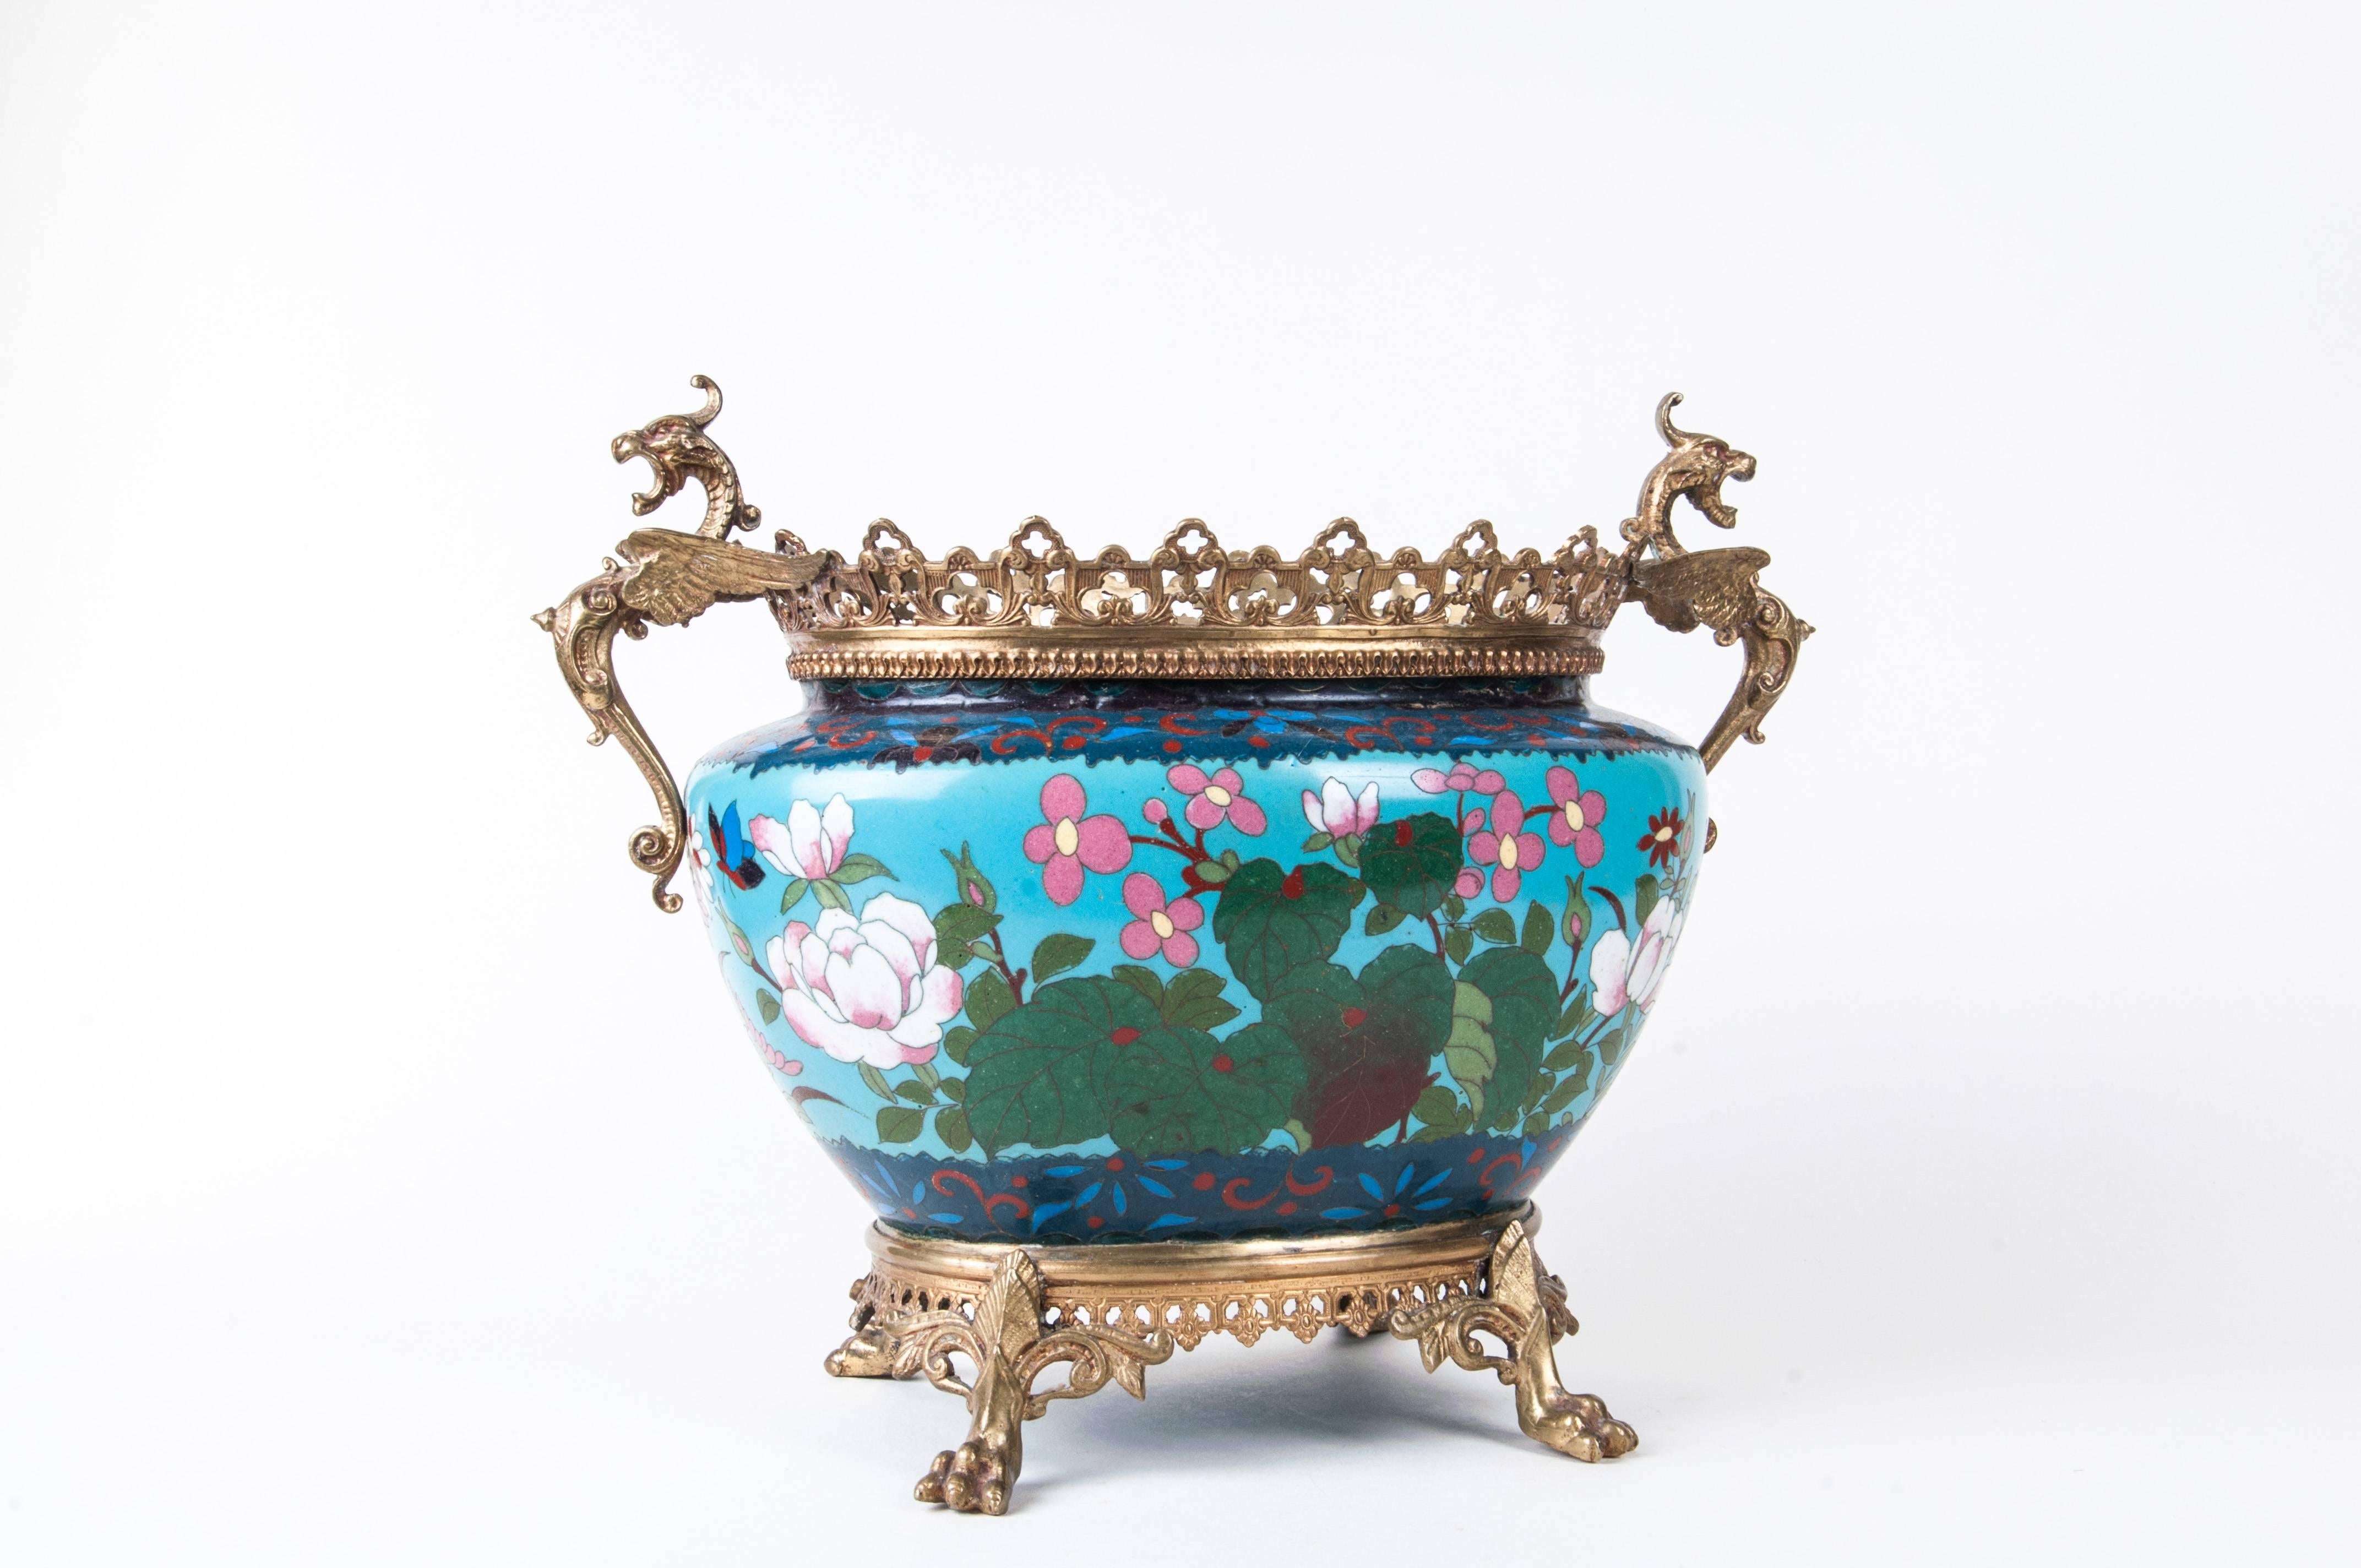 A French Japonisme ormolu-mounted Japanese cloisonné cachepot
The cloisonne body having bird, flower and butterfly motif with ormolu rims, griffin handles, and claw feet
Size: 10" H x 12" W x 7.5" D.